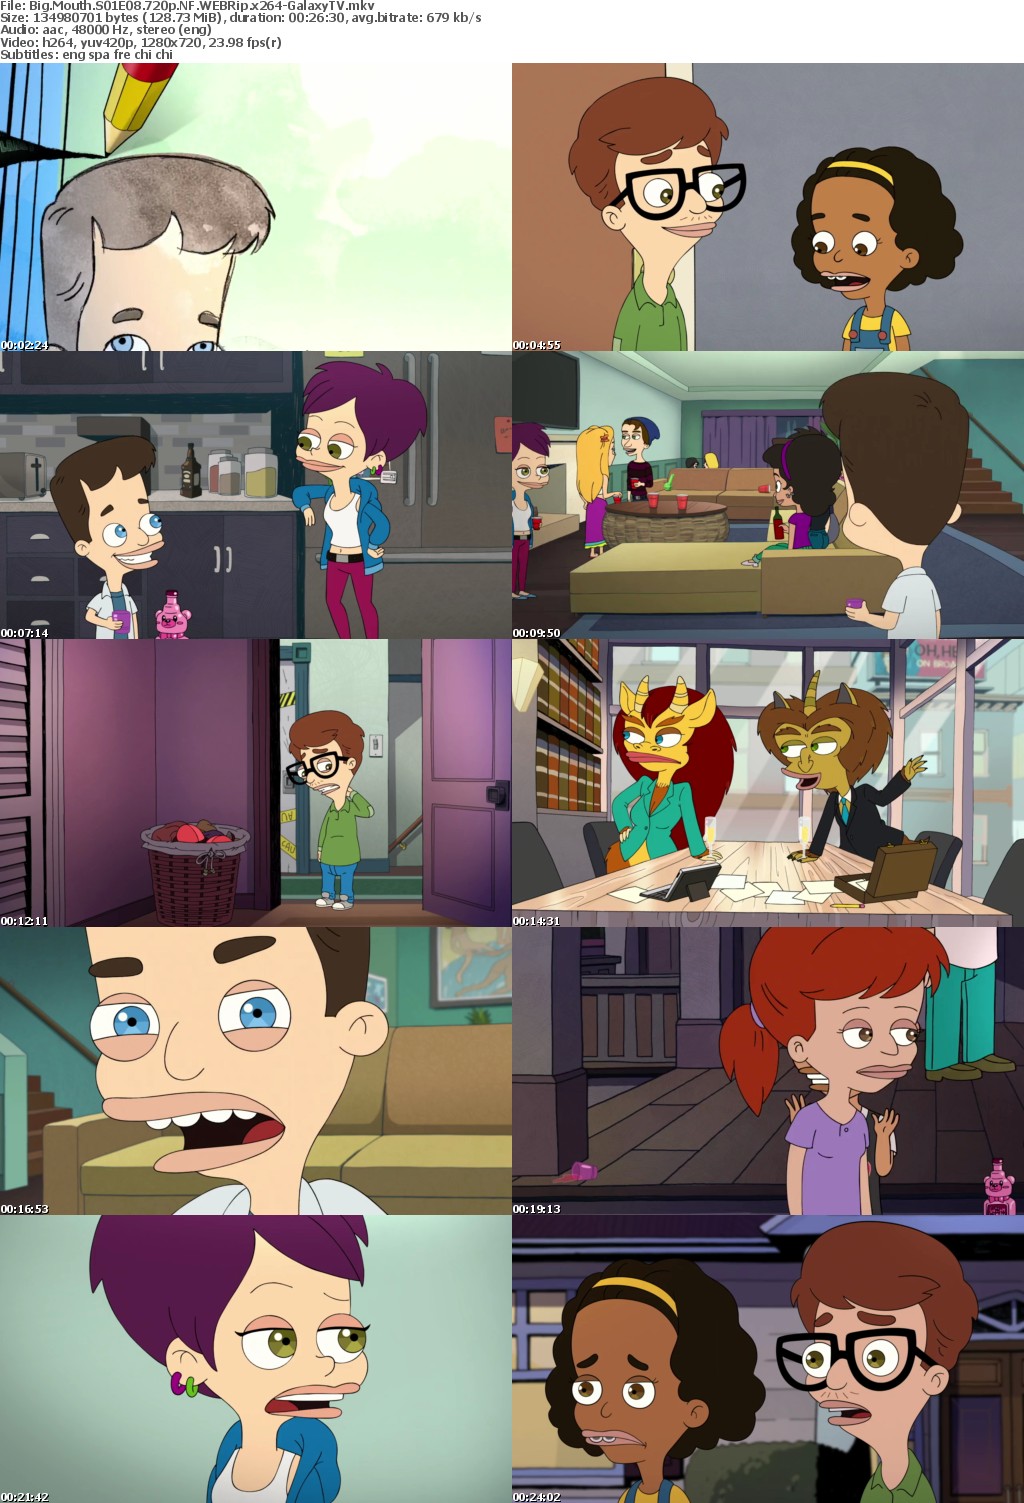 Big Mouth S01 COMPLETE 720p NF WEBRip x264-GalaxyTV